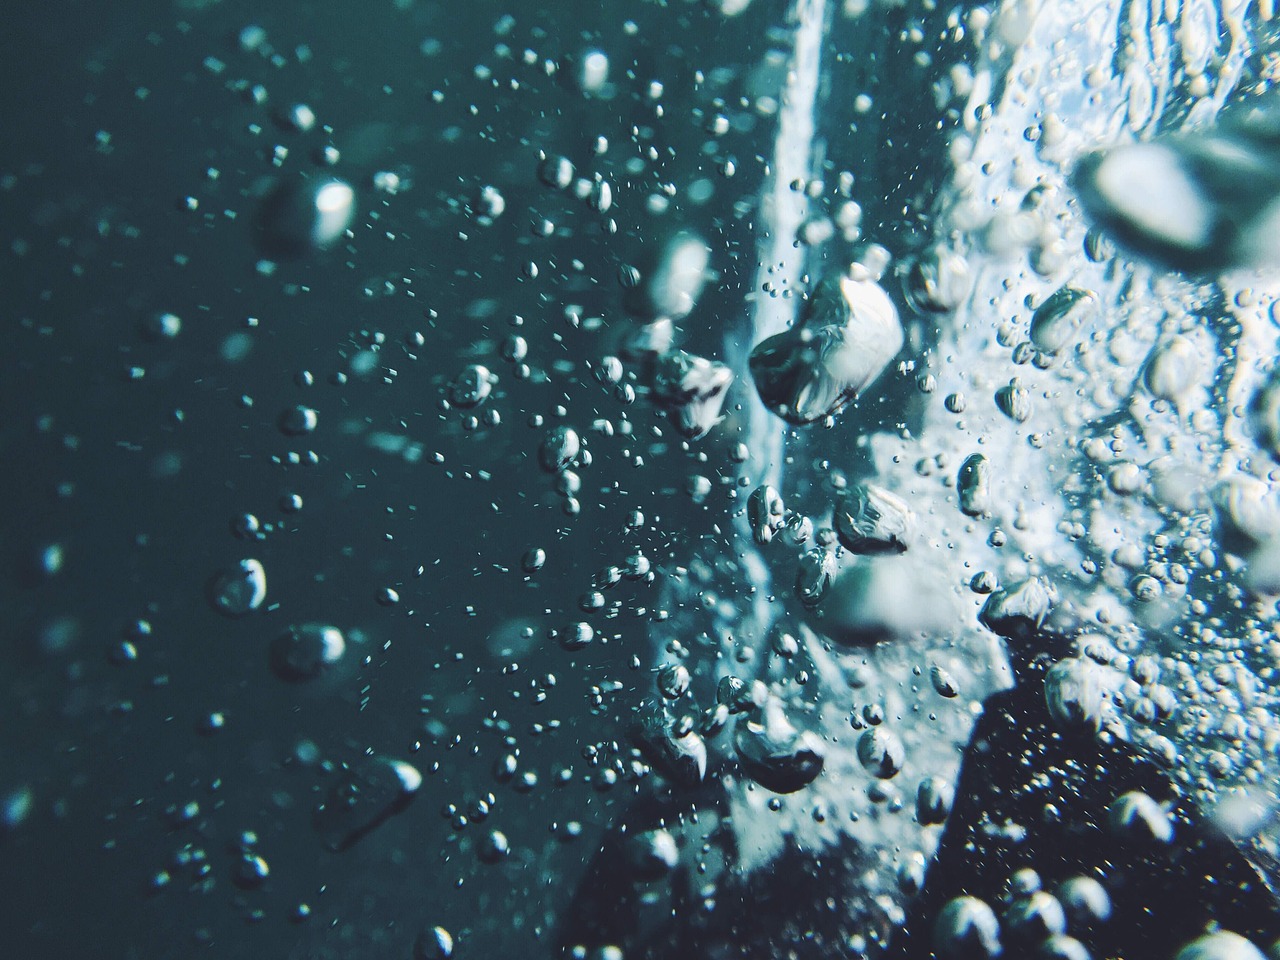 a close up of a body of water with bubbles, pexels, happening, underwater looking up, droplets on the walls, washed out background, detailed cinematic photography